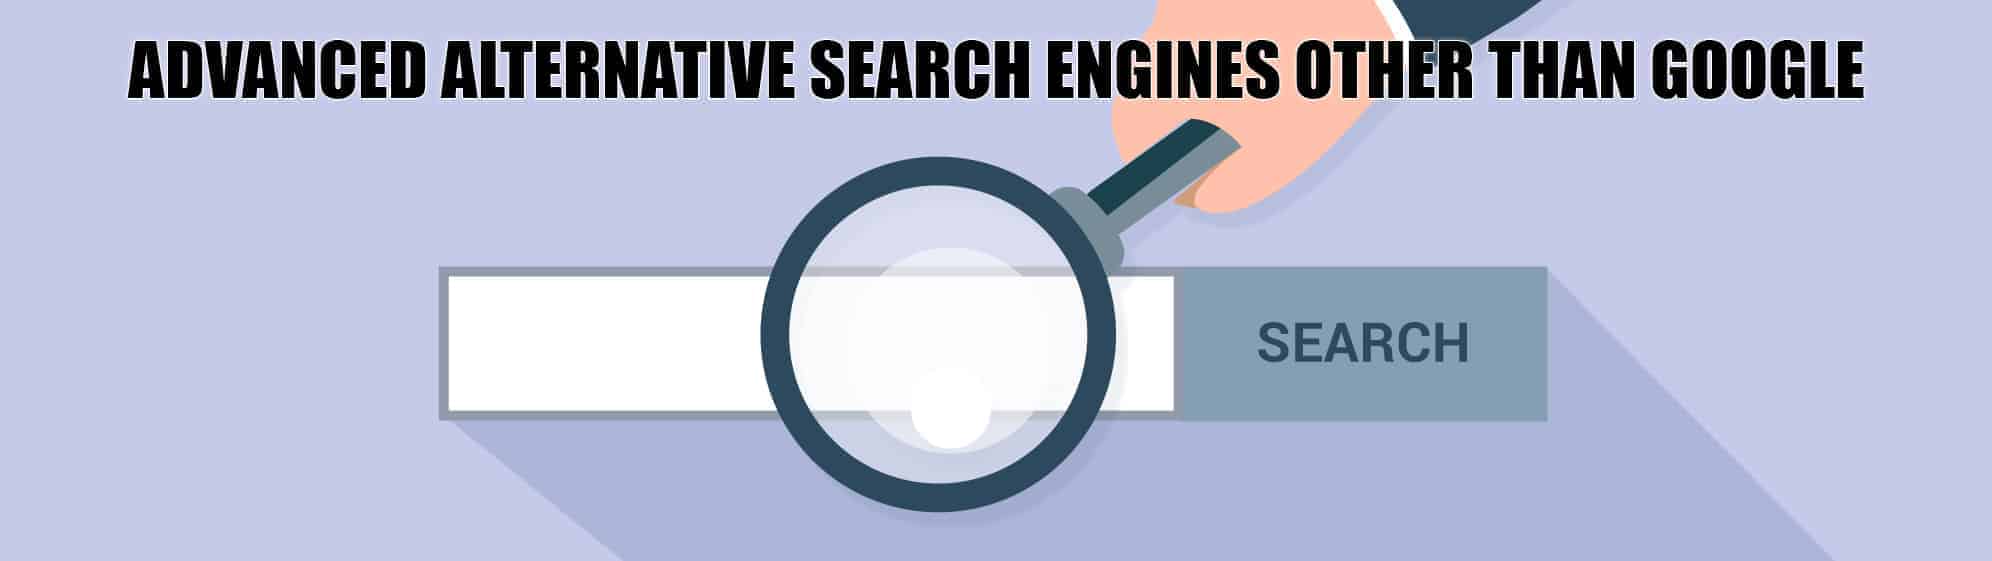 Advanced Alternative Search Engines Other Than Google